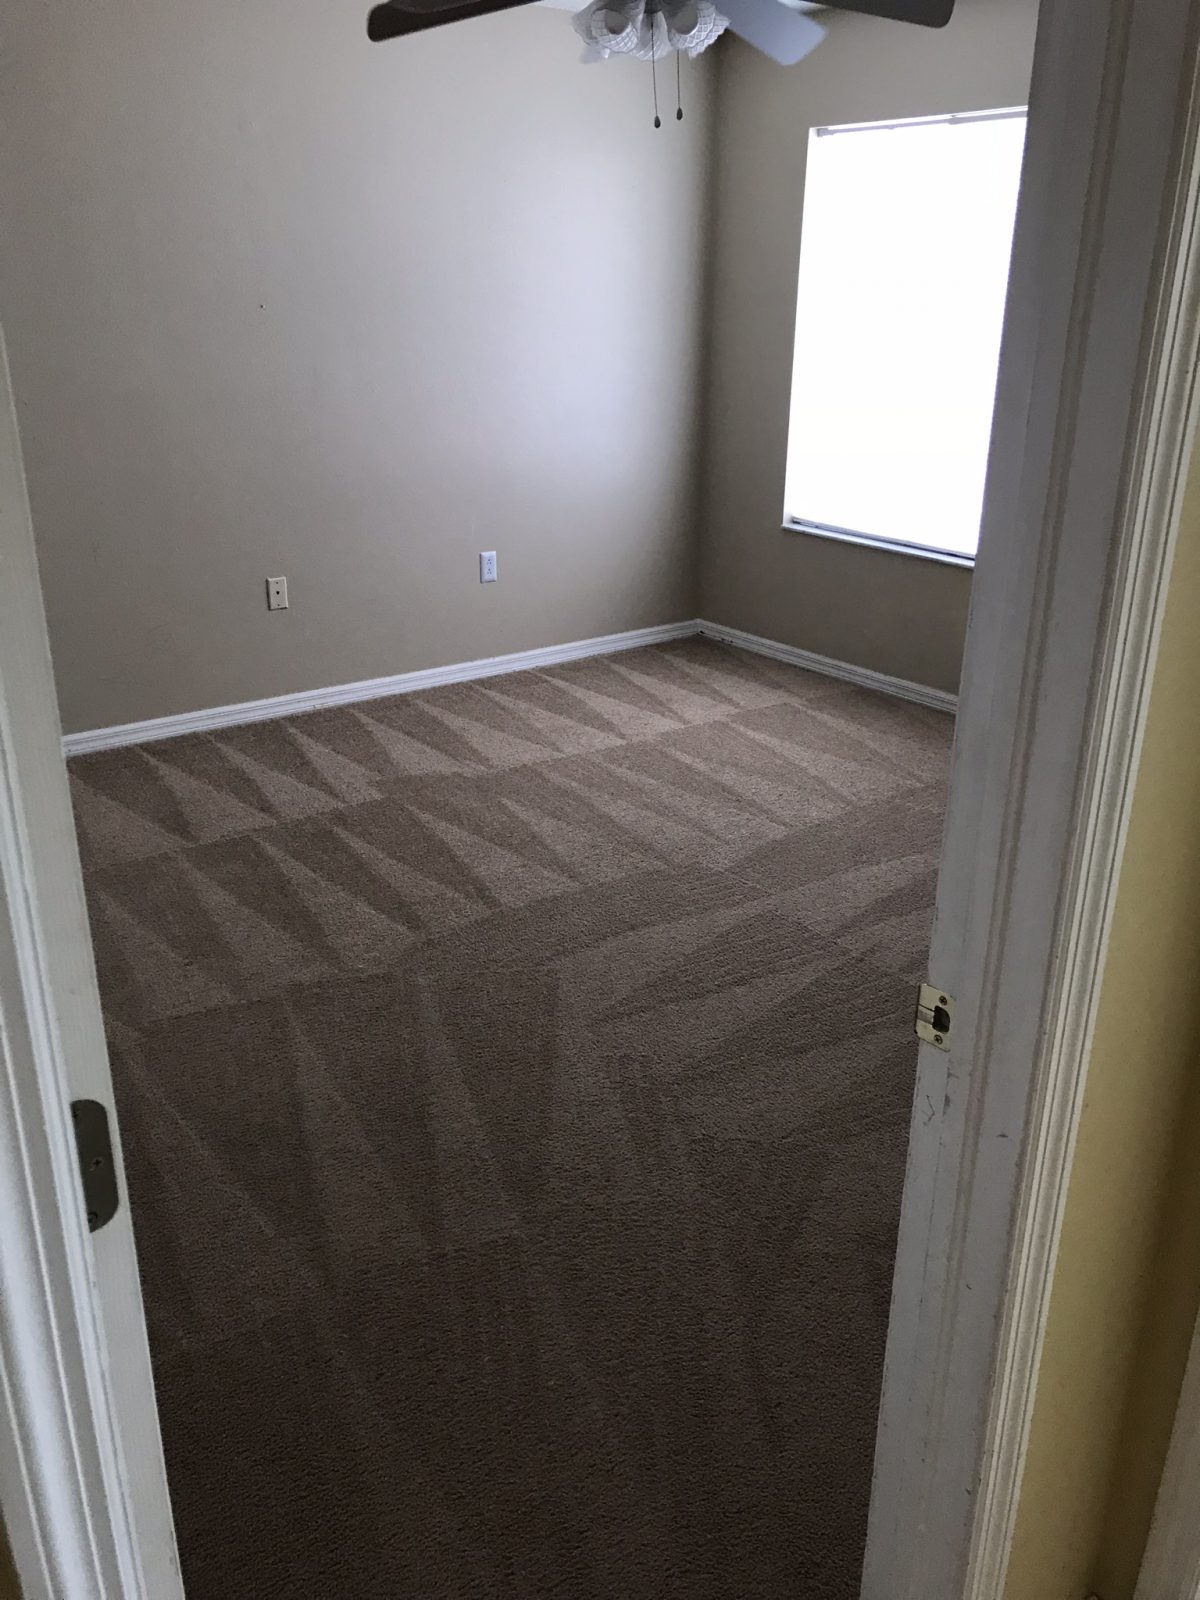 Professional Carpet Cleaning Palm Harbor Florida by Howards Cleaning Service